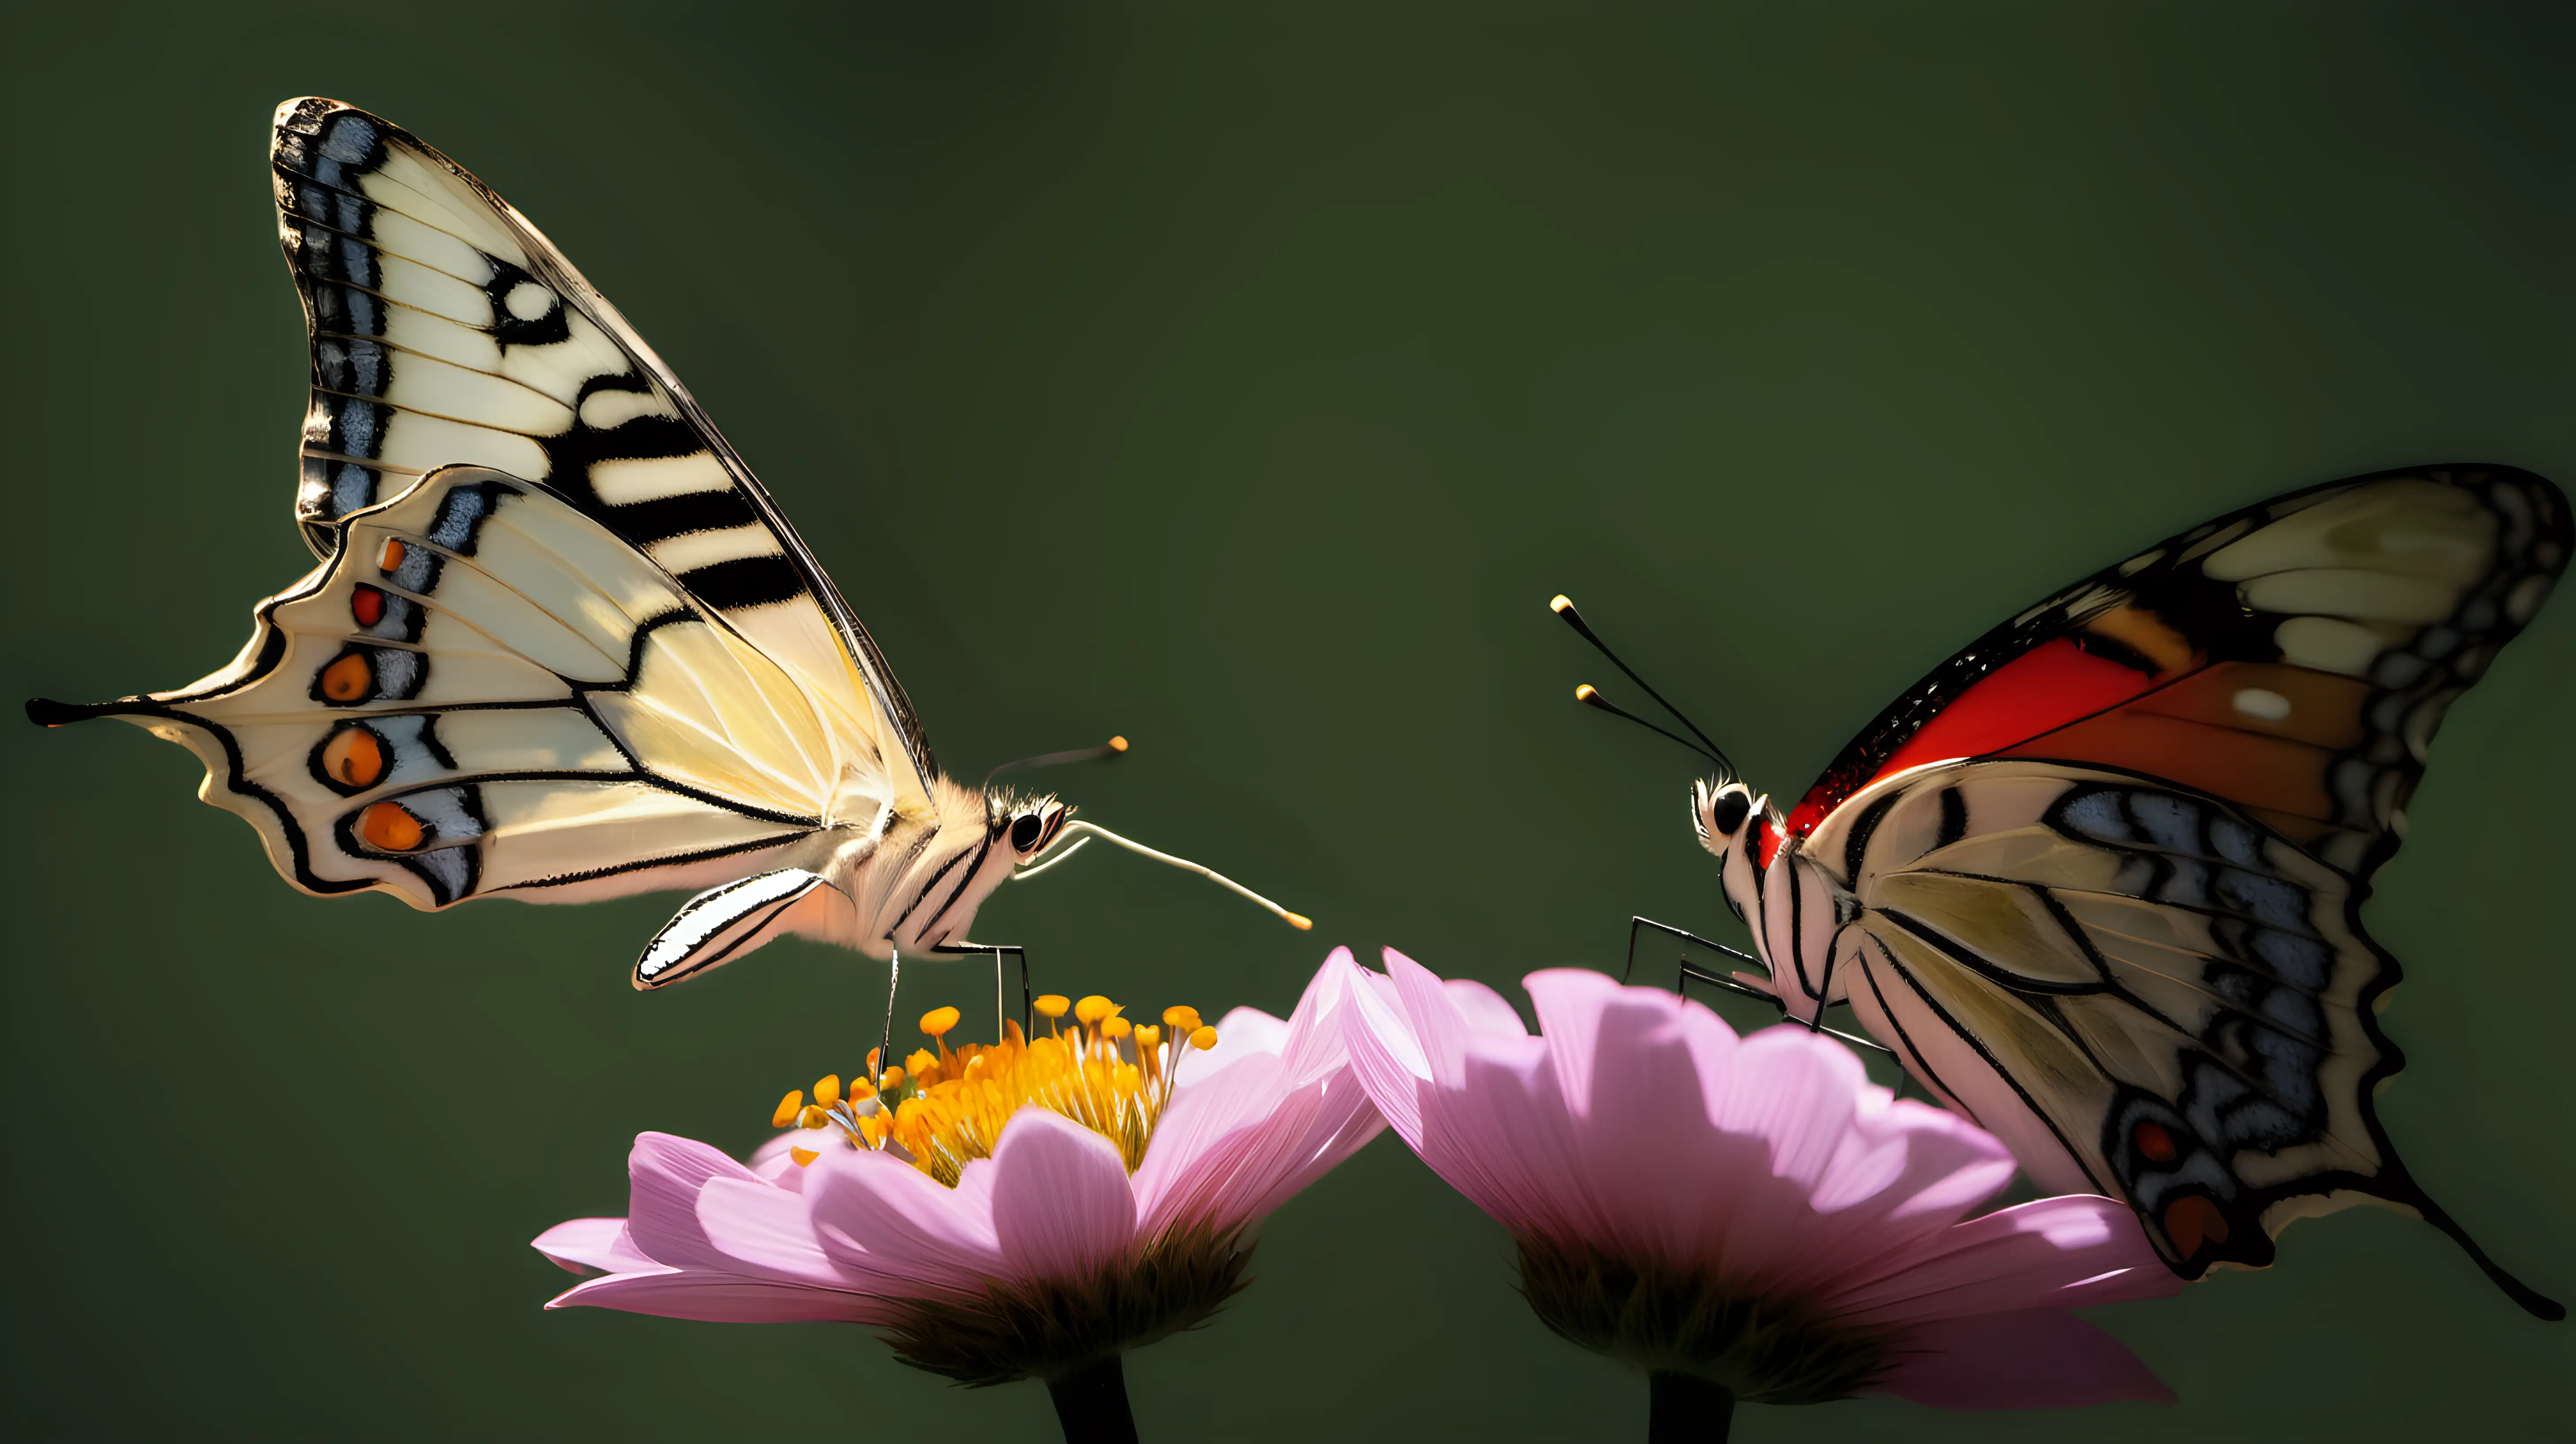 "Frame a butterfly delicately sipping nectar from a flower, highlighting the intimate relationship between pollinator and plant."